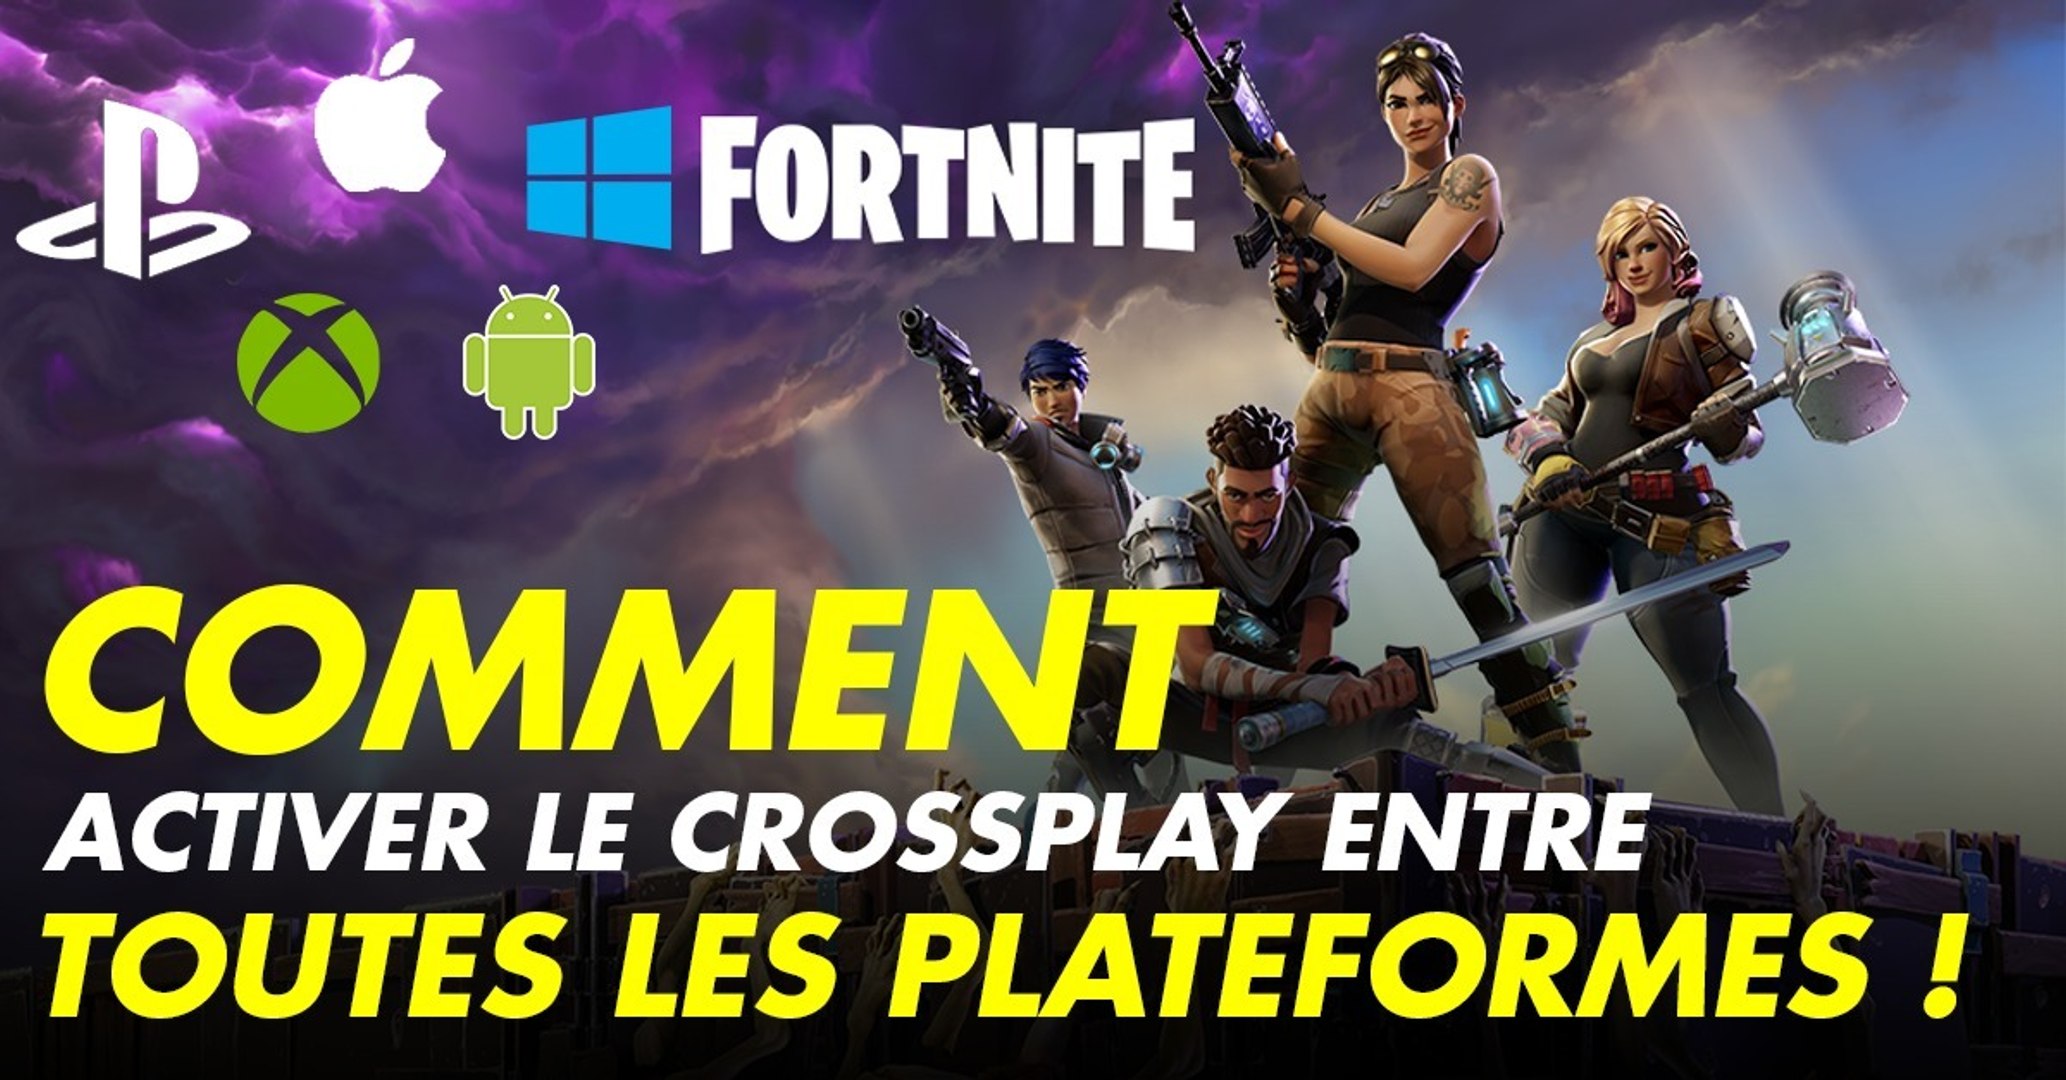 Fortnite : activer le crossplay Switch, XBOX, PS4, PC et mobiles - Vidéo  Dailymotion